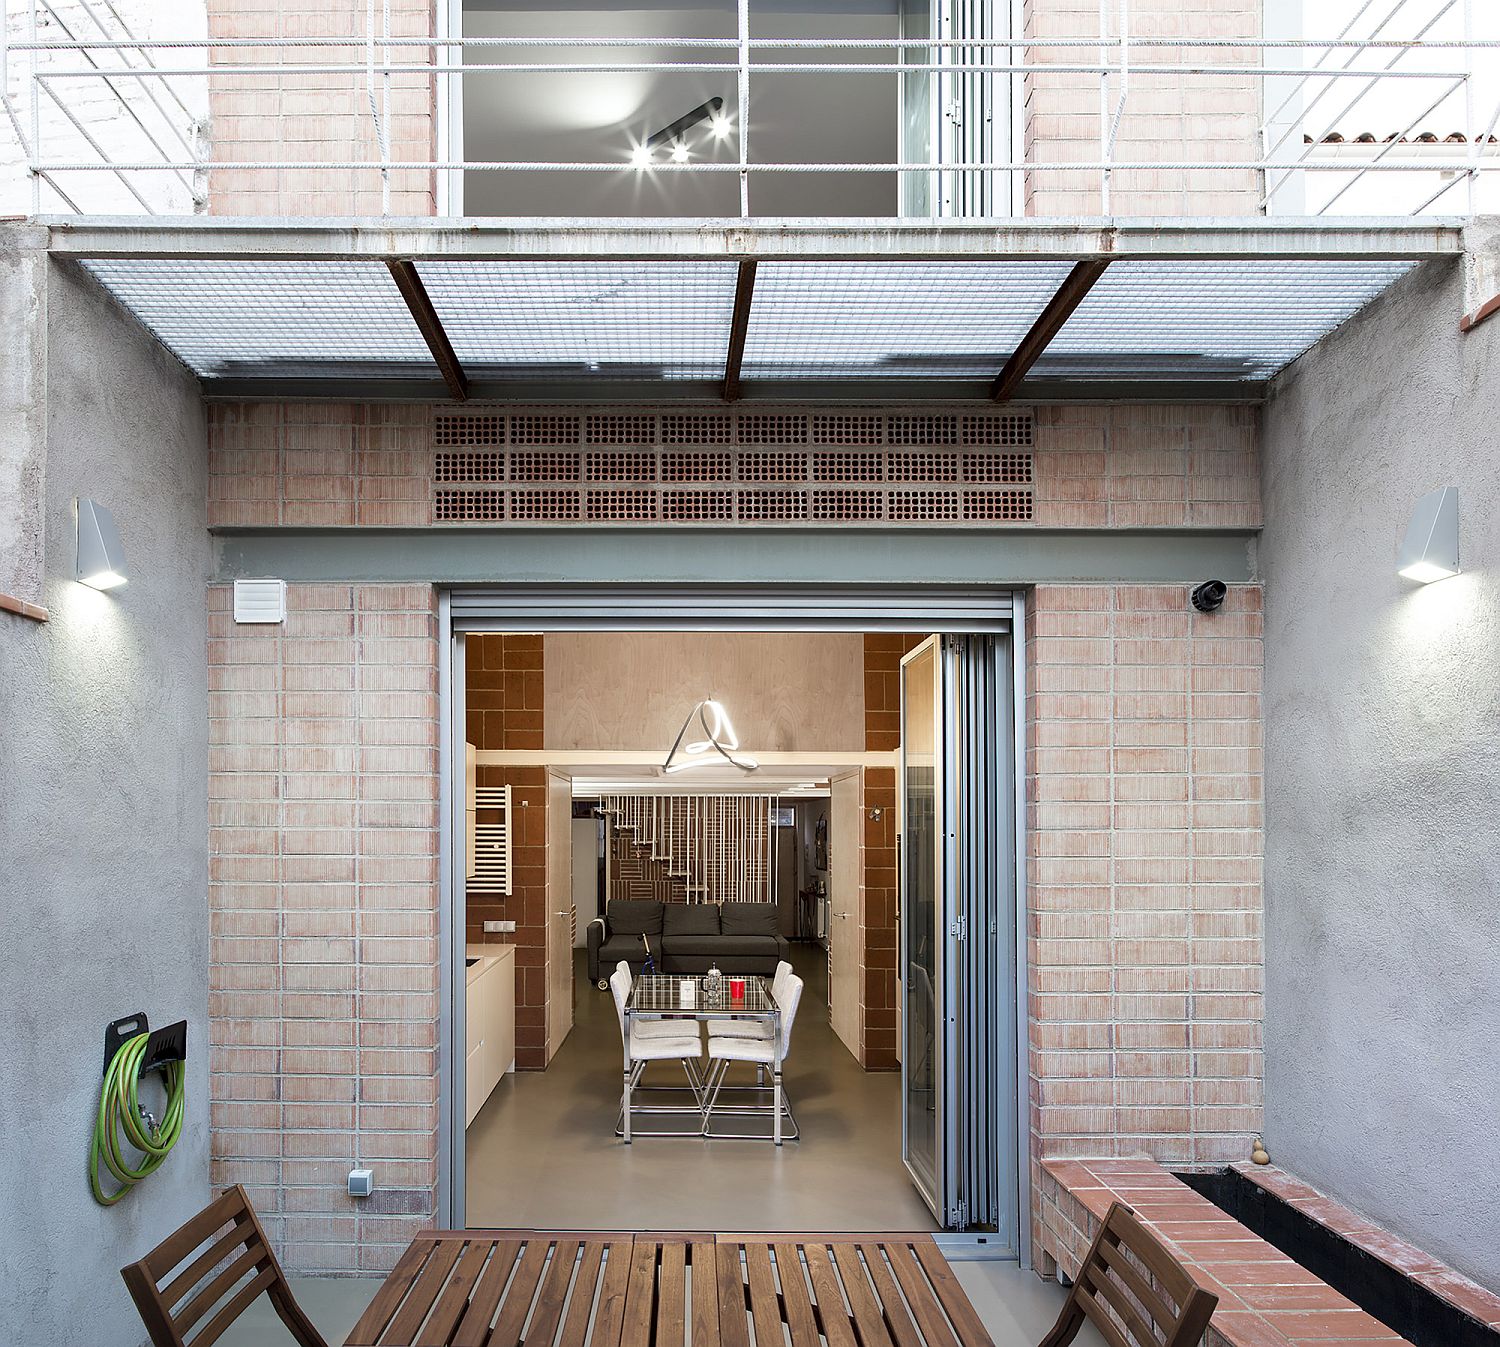 Small-and-private-rear-couryard-of-the-Barcelona-home